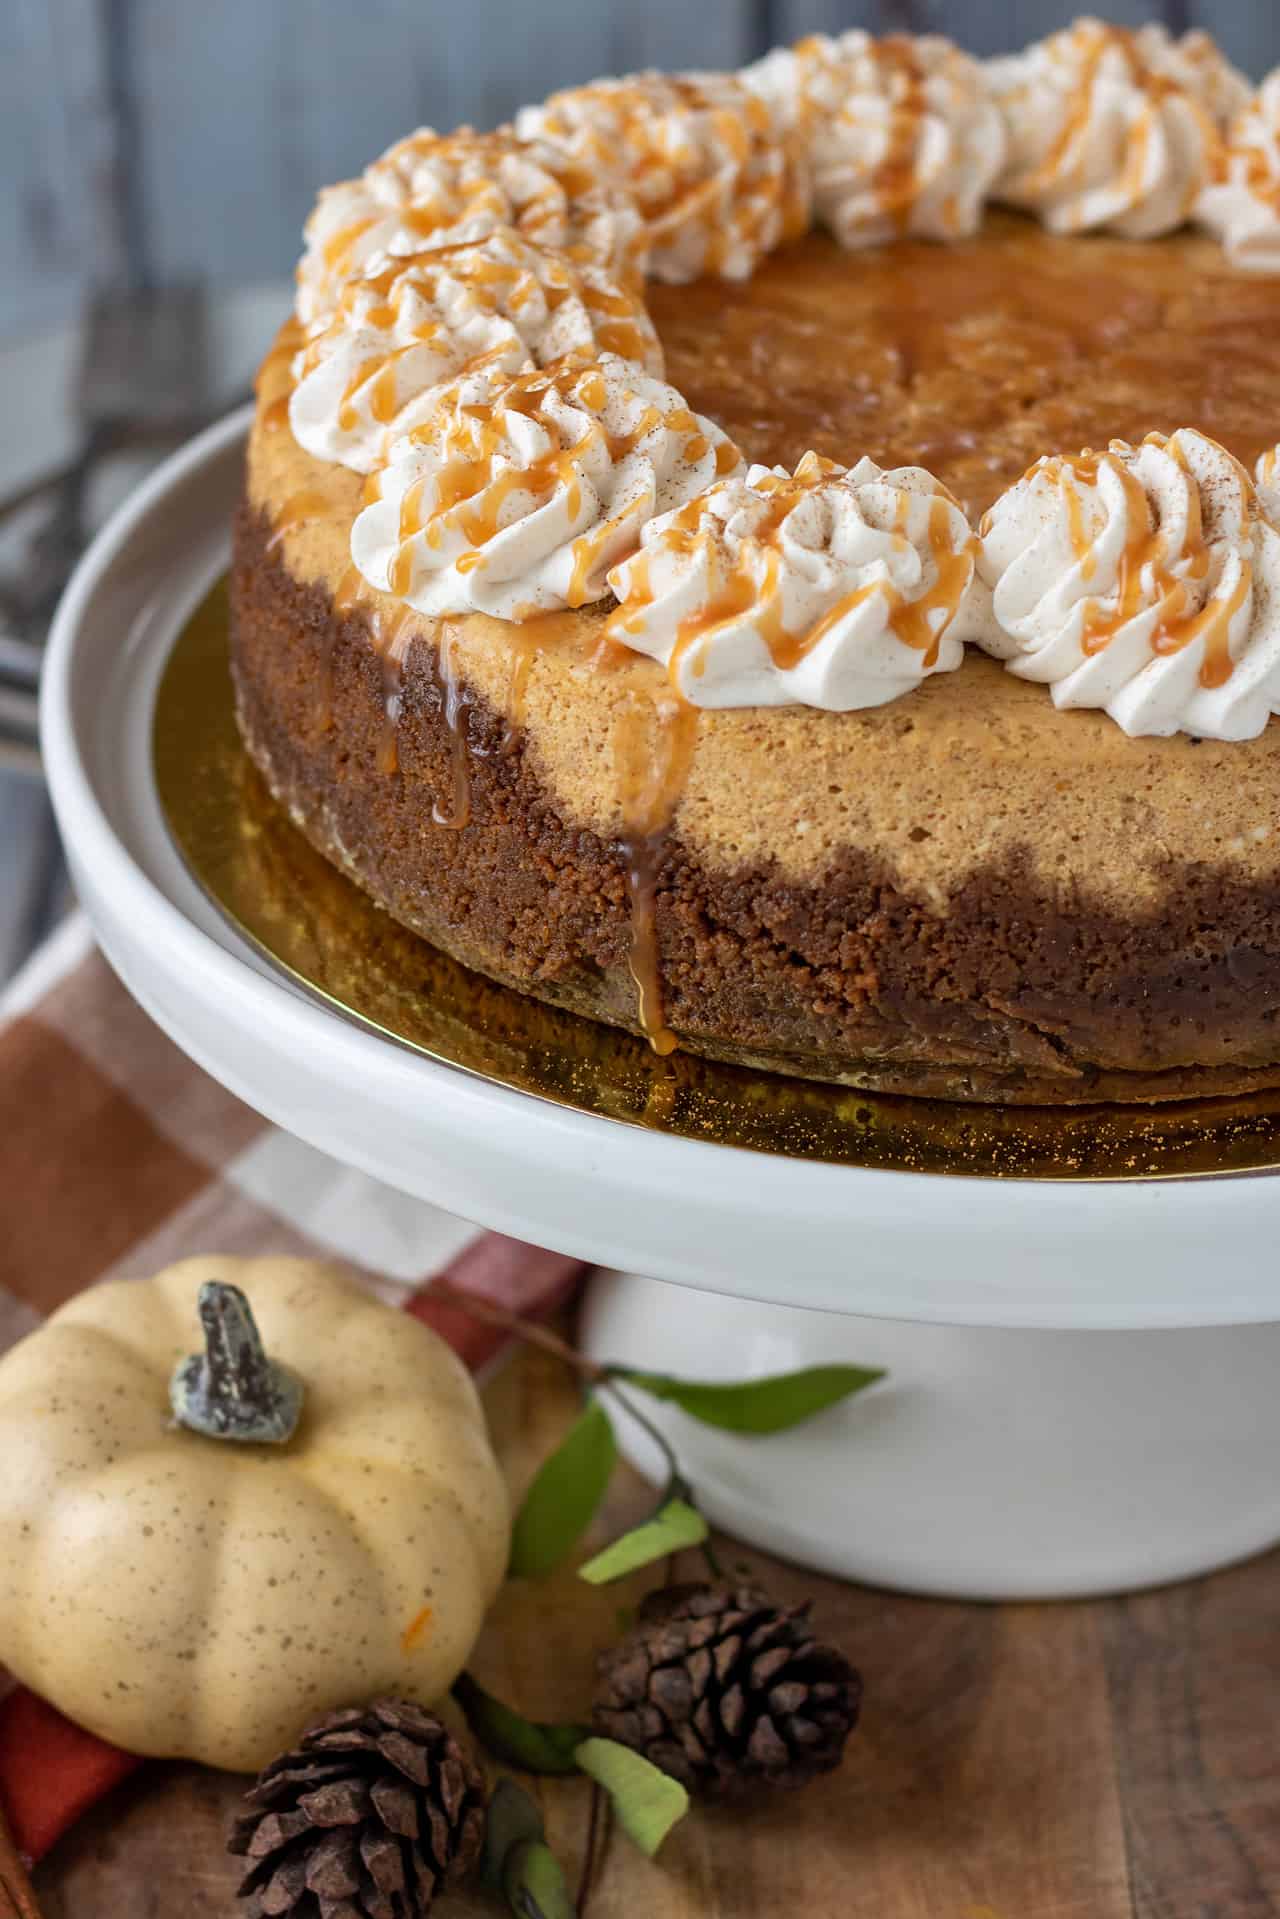 A white cake stand topped with a whole cheesecake. It's got dollops of whipped cream on each slice and it's drizzled with salted caramel sauce. There's a white pumpkin, greenery, and two pinecones in the background. The cake stand is sitting on a wooden surface with a orange and white plaid dish towel.